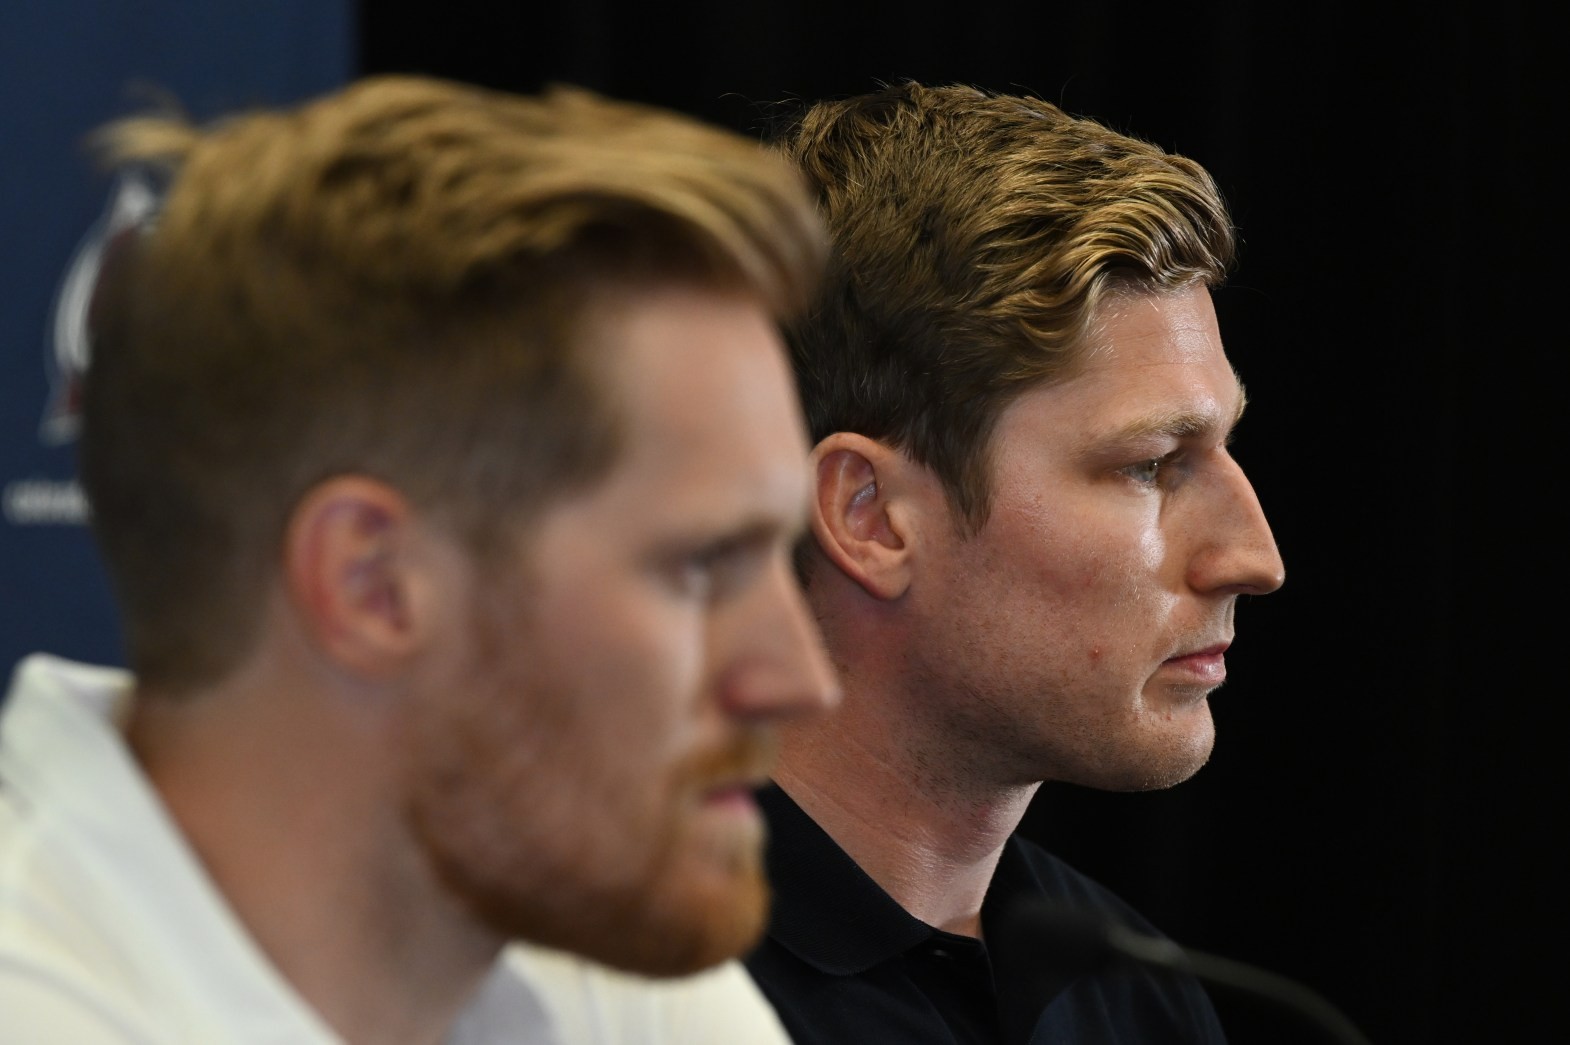 Keeler: Can Avalanche win Stanley Cup without Gabe Landeskog